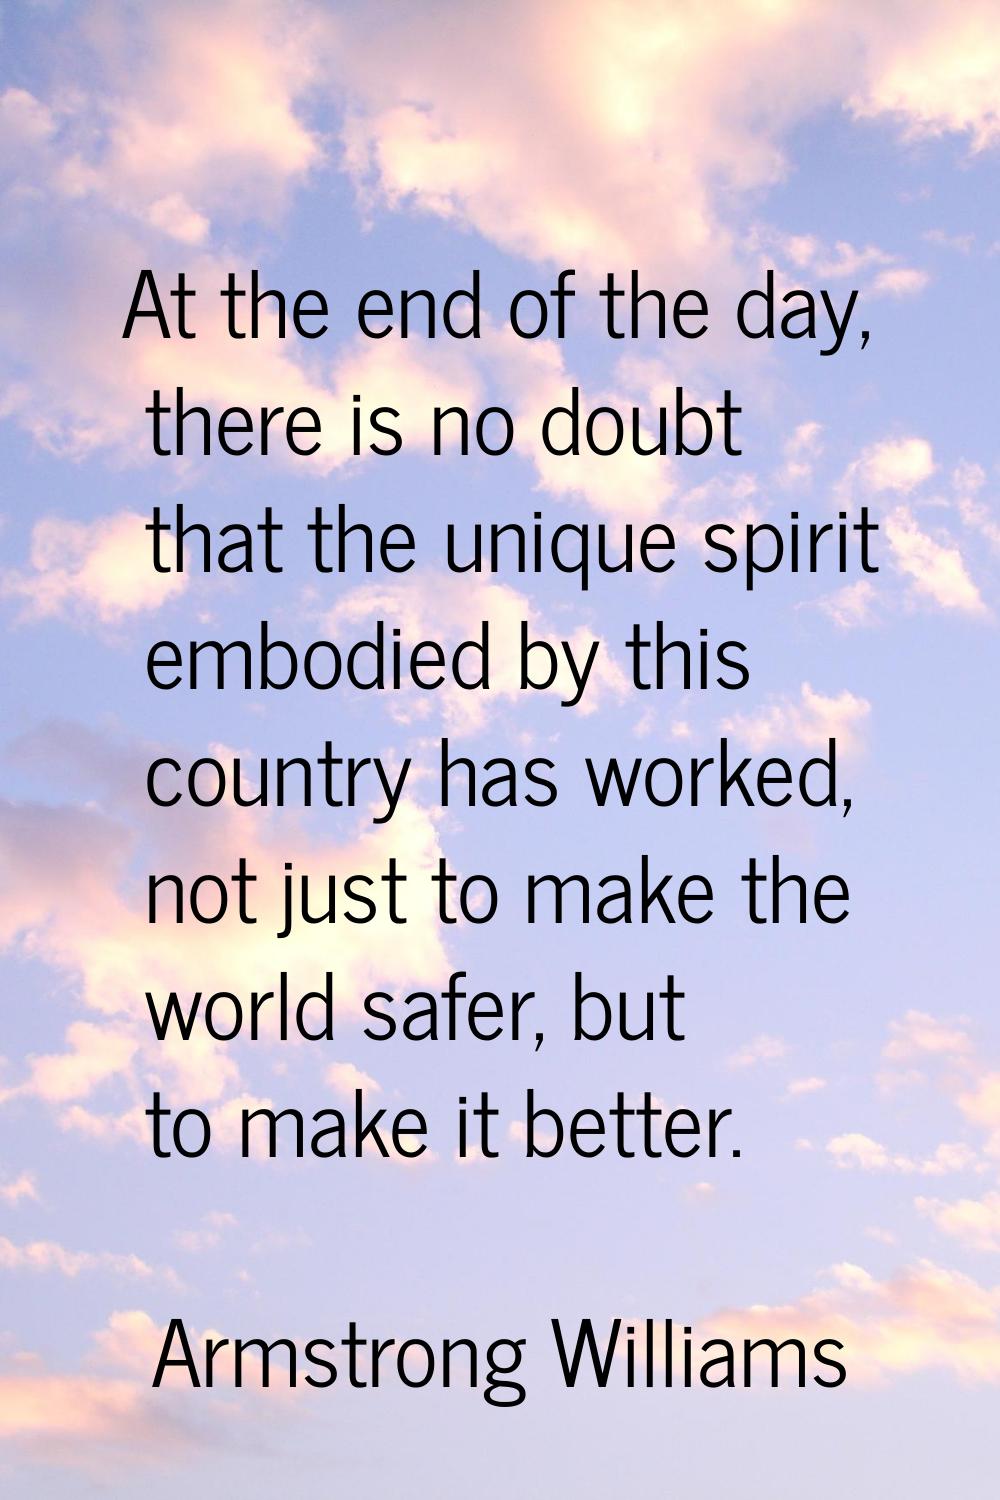 At the end of the day, there is no doubt that the unique spirit embodied by this country has worked